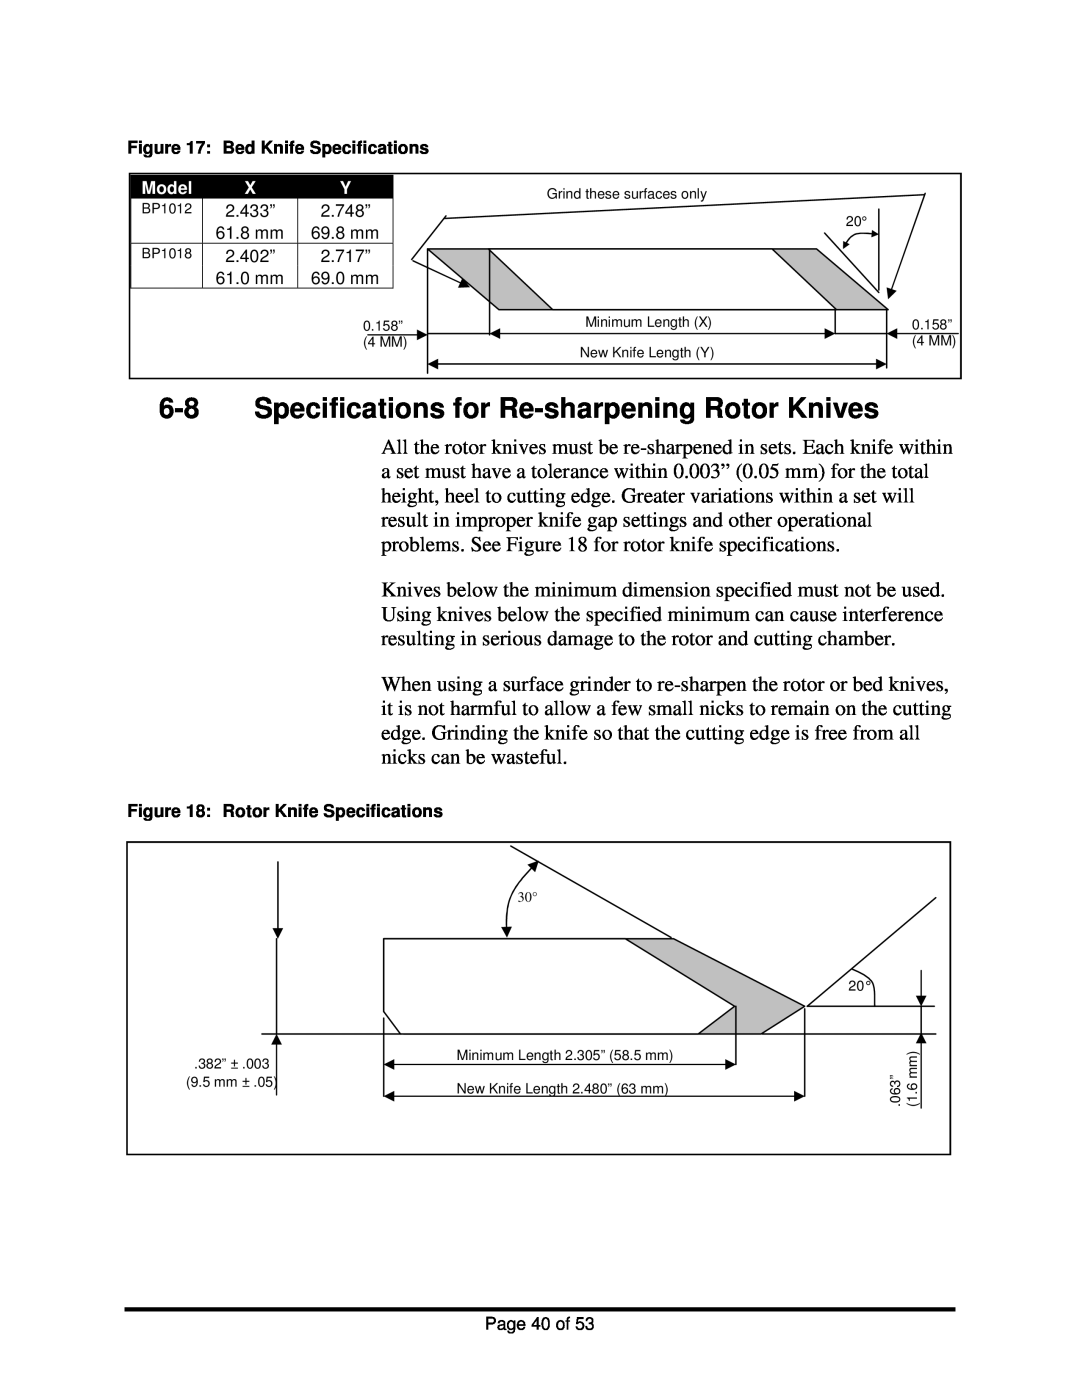 Sterling BP1018 6-8Specifications for Re-sharpeningRotor Knives, Bed Knife Specifications, Rotor Knife Specifications 